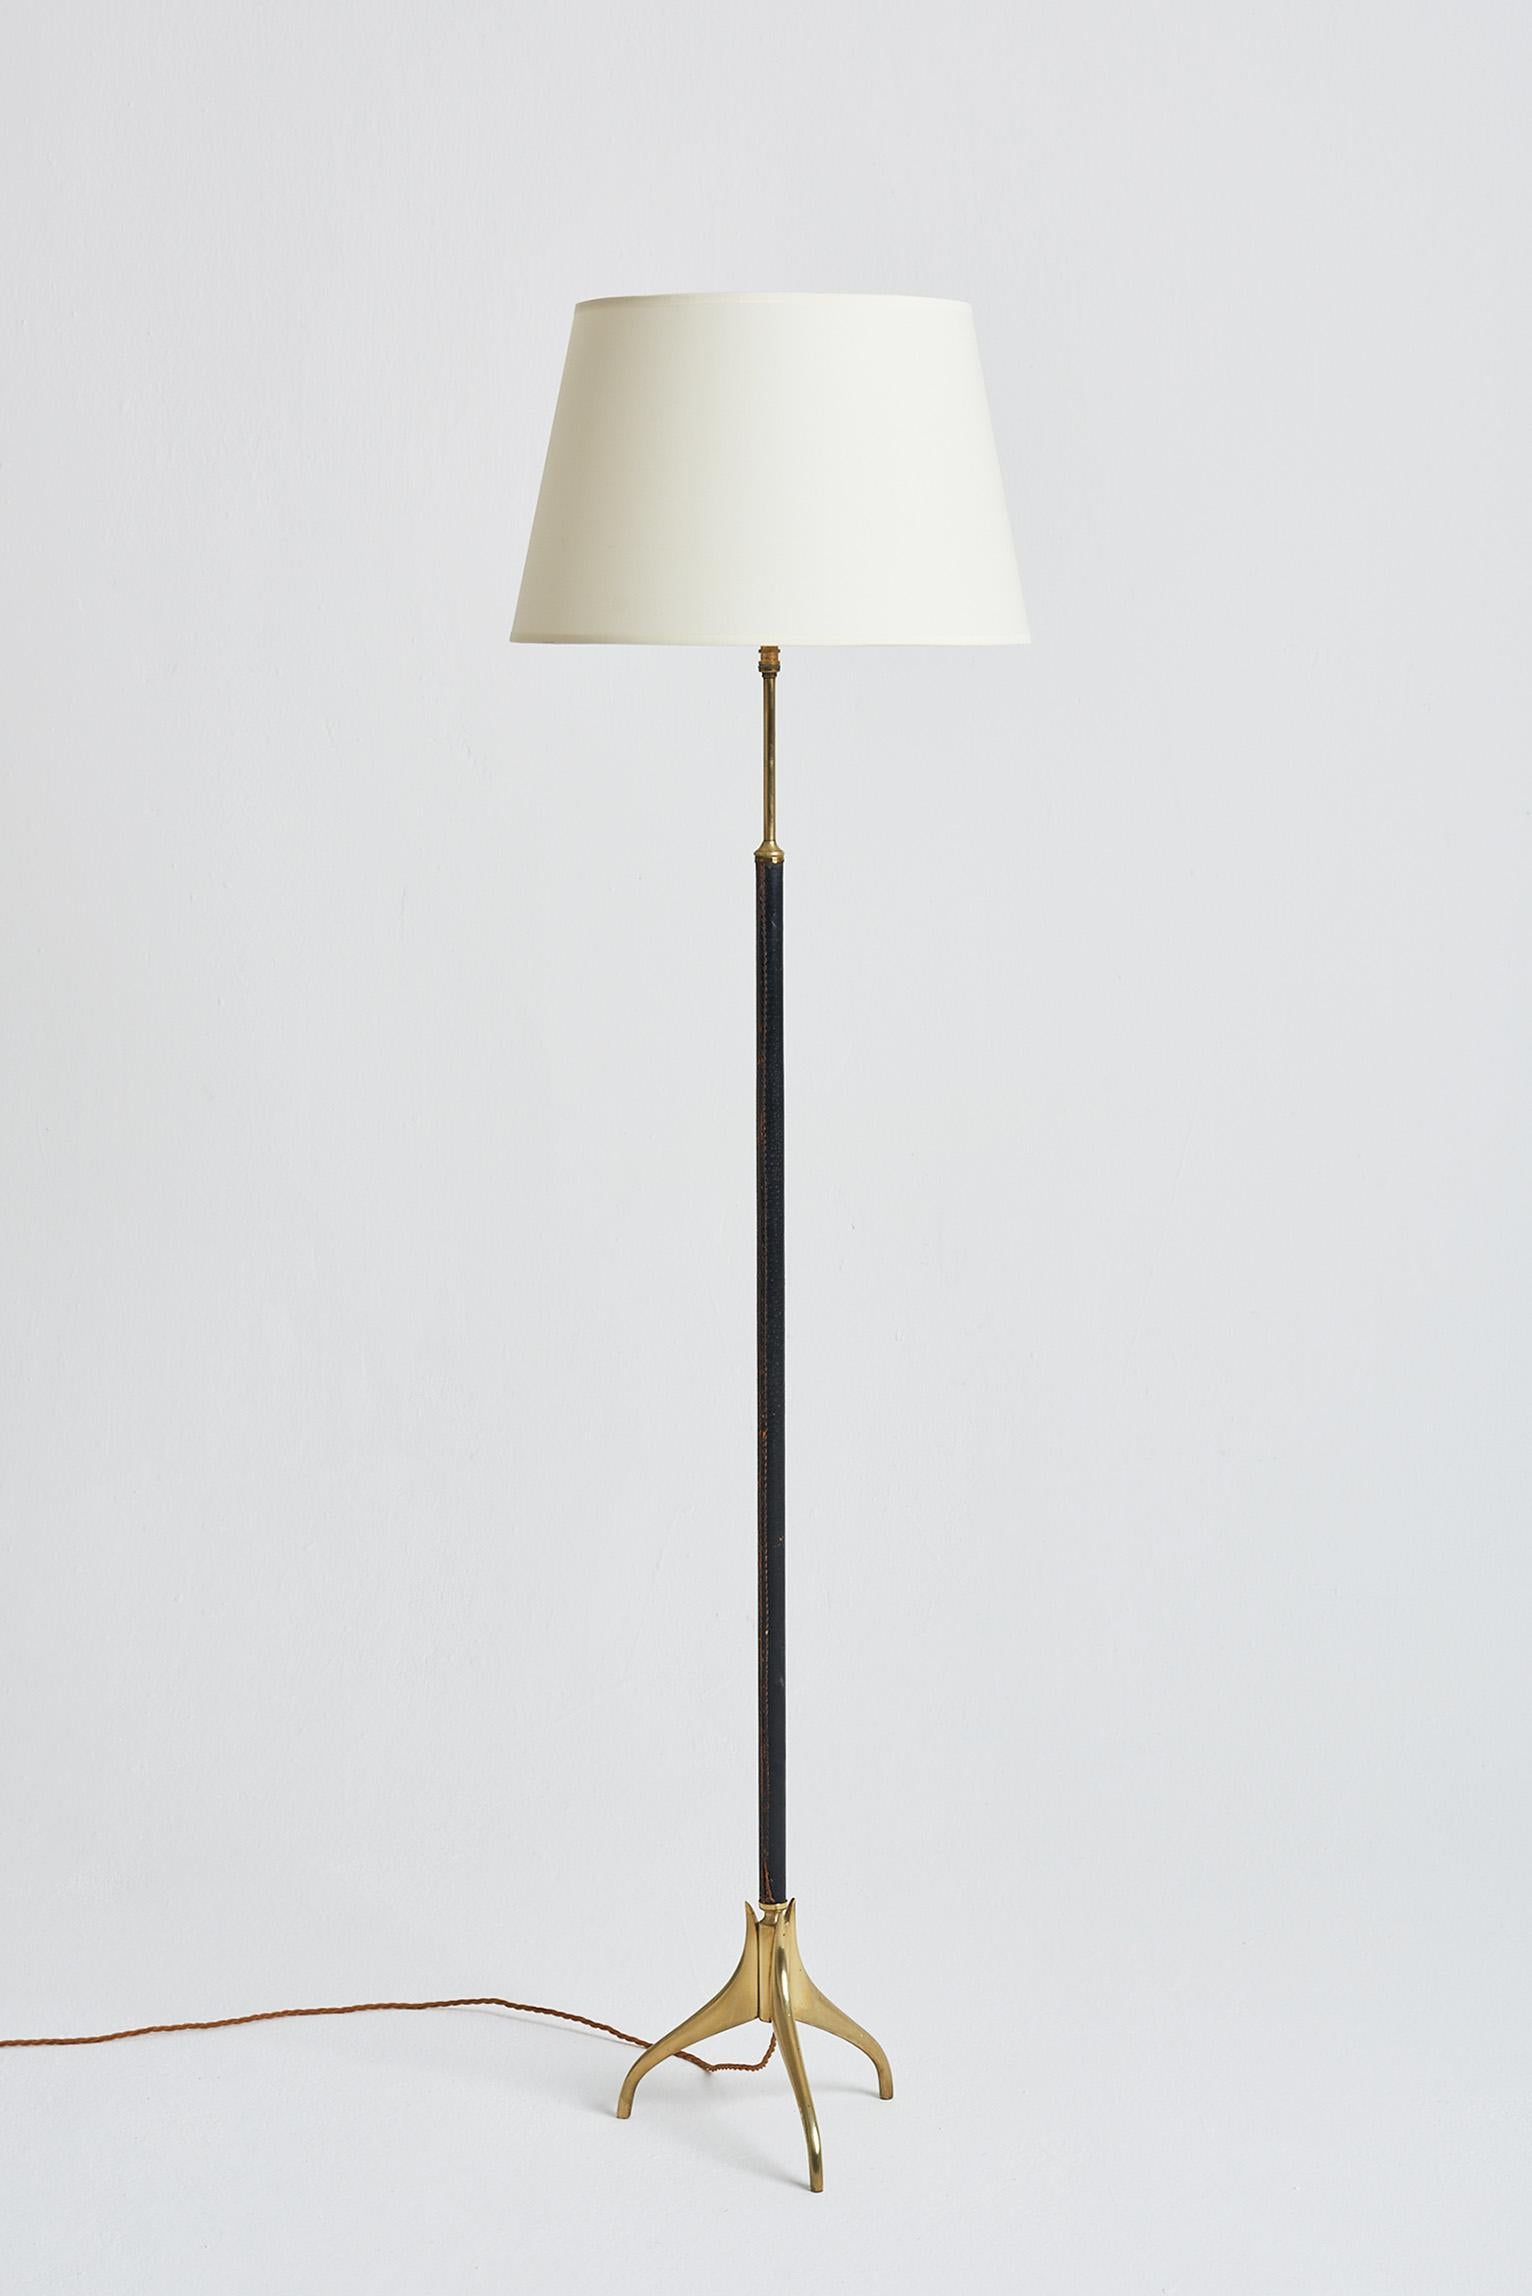 A brass and saddle stitched black leather floor lamp.
France, Circa 1950.
With the shade: 146 cm high by 41 cm diameter.
Lamp base only: 129 cm high by 30 cm diameter.